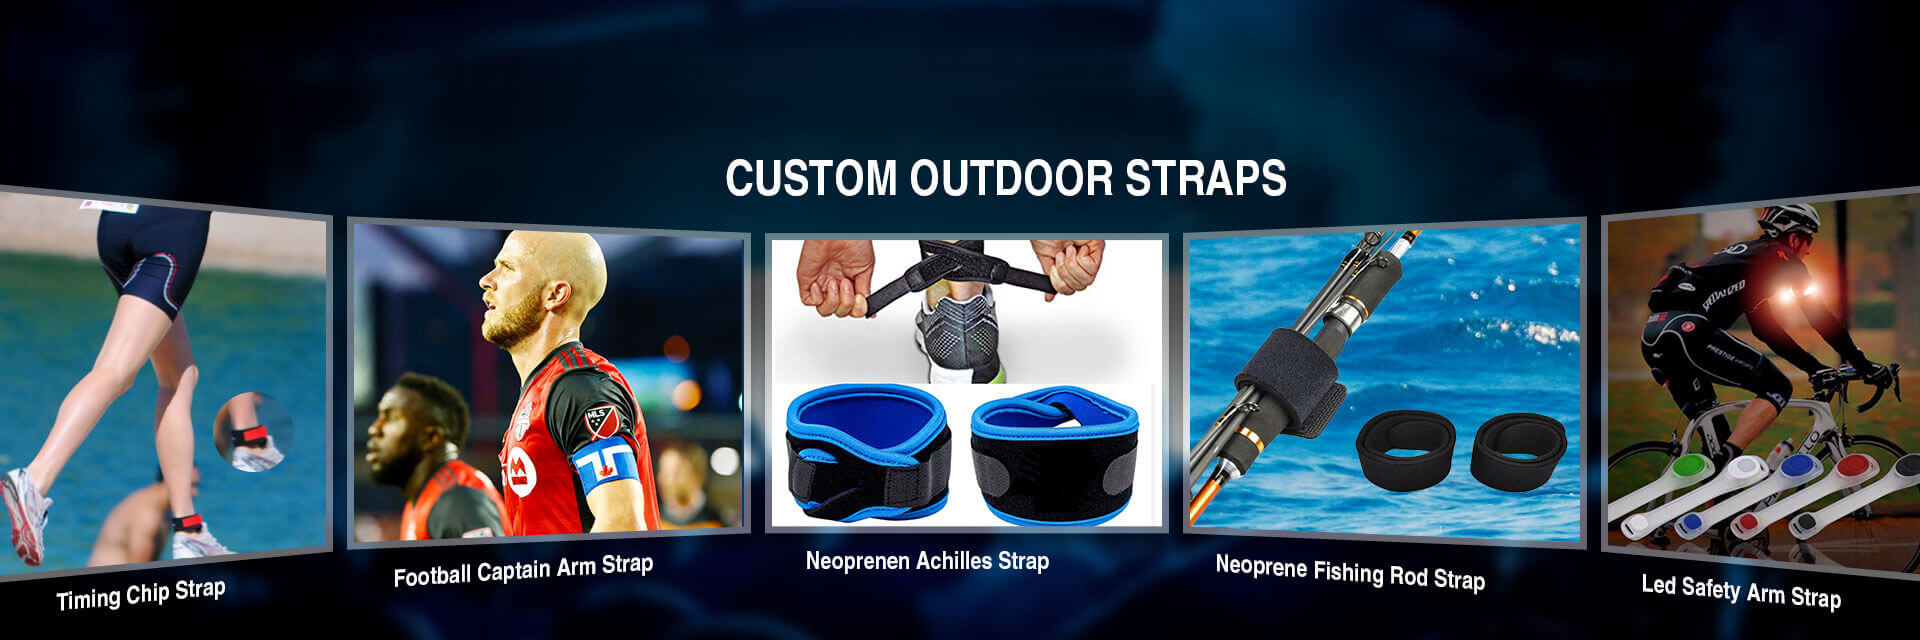 Outdoor Sports Straps